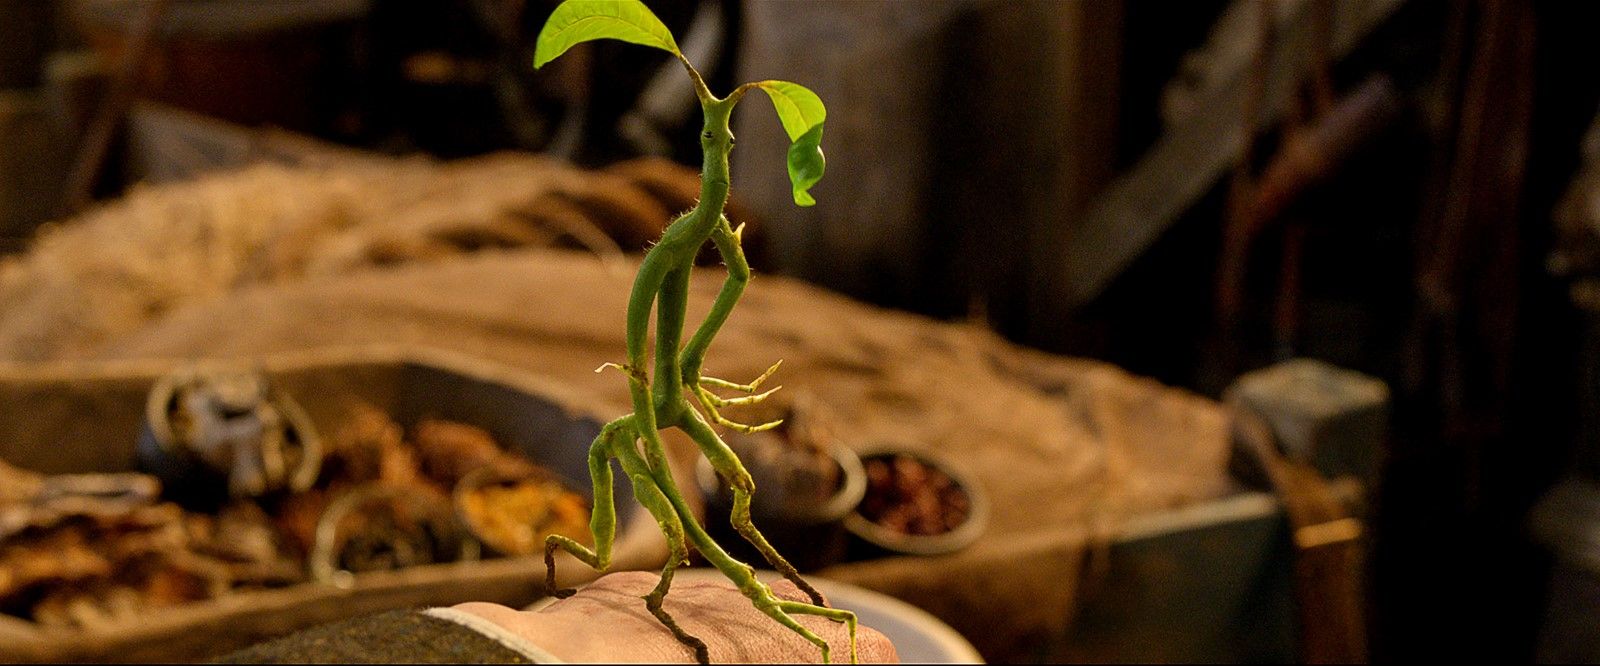 Fantastic Beasts and Where to Find Them Bowtruckle Photo